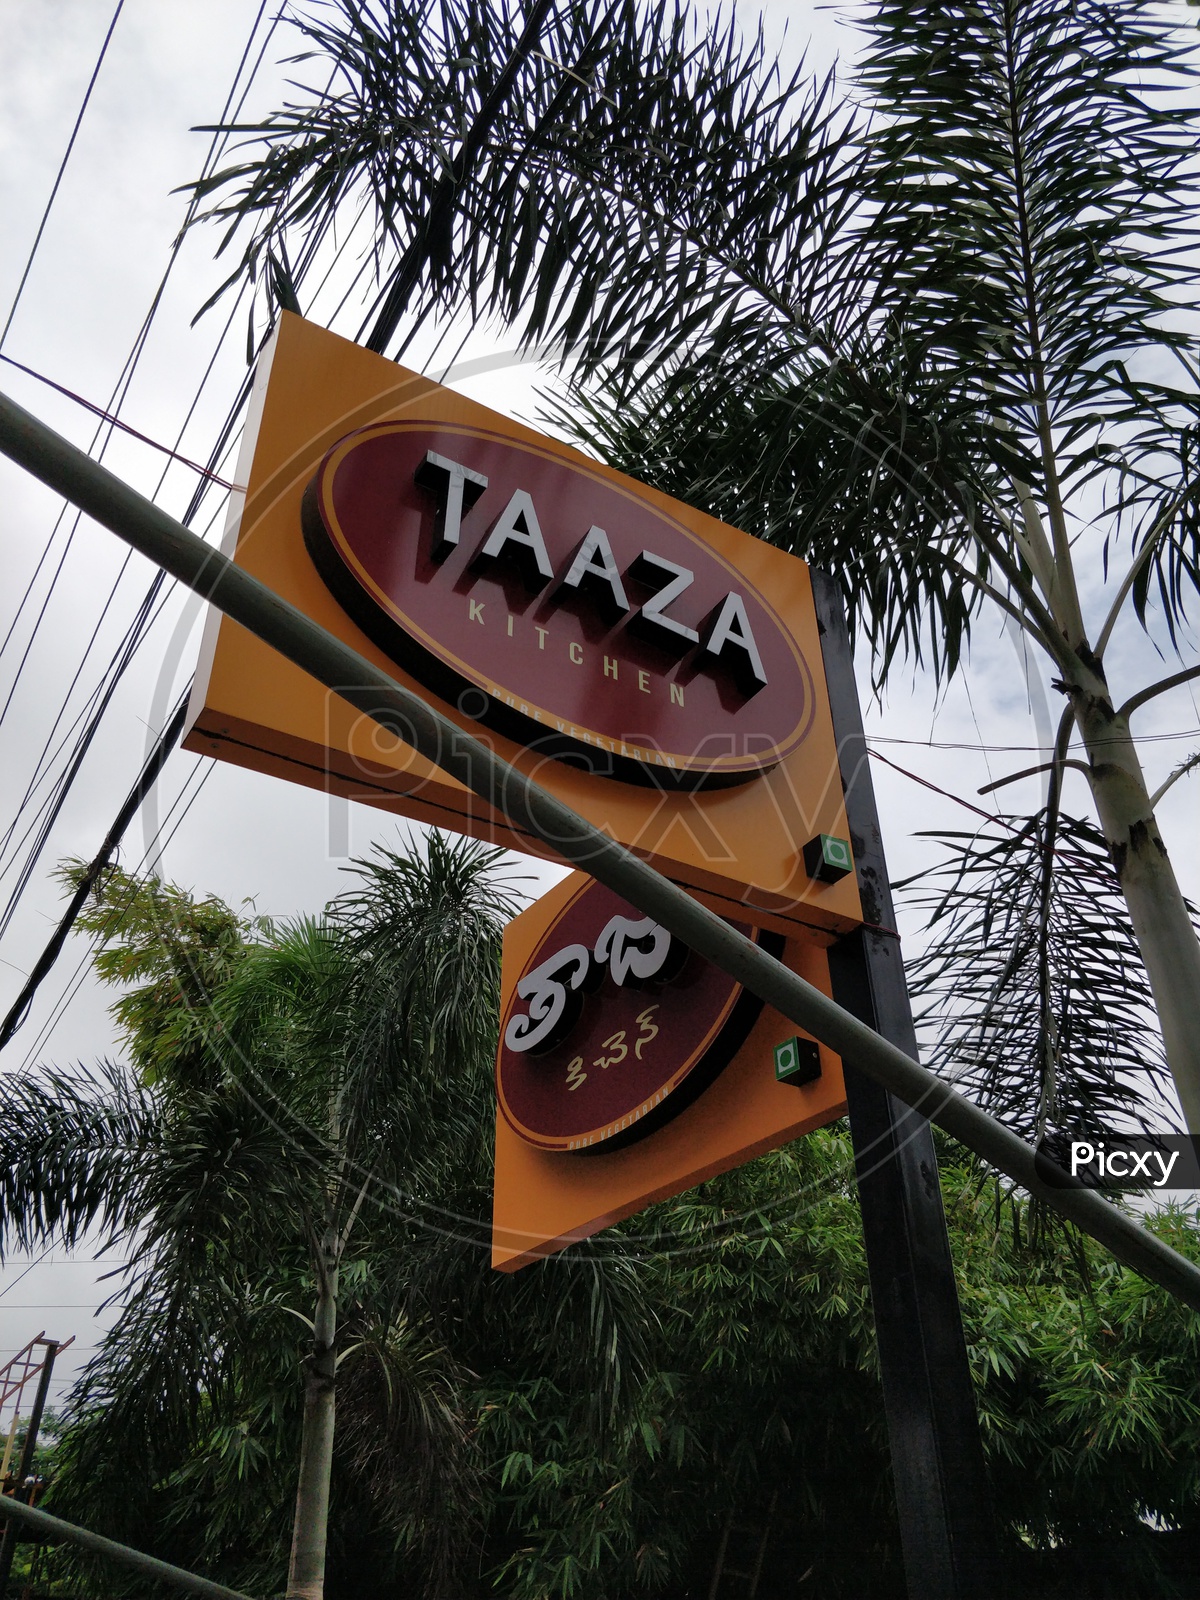 Taaza Kitchen an authentic South Indian breakfast restaurant